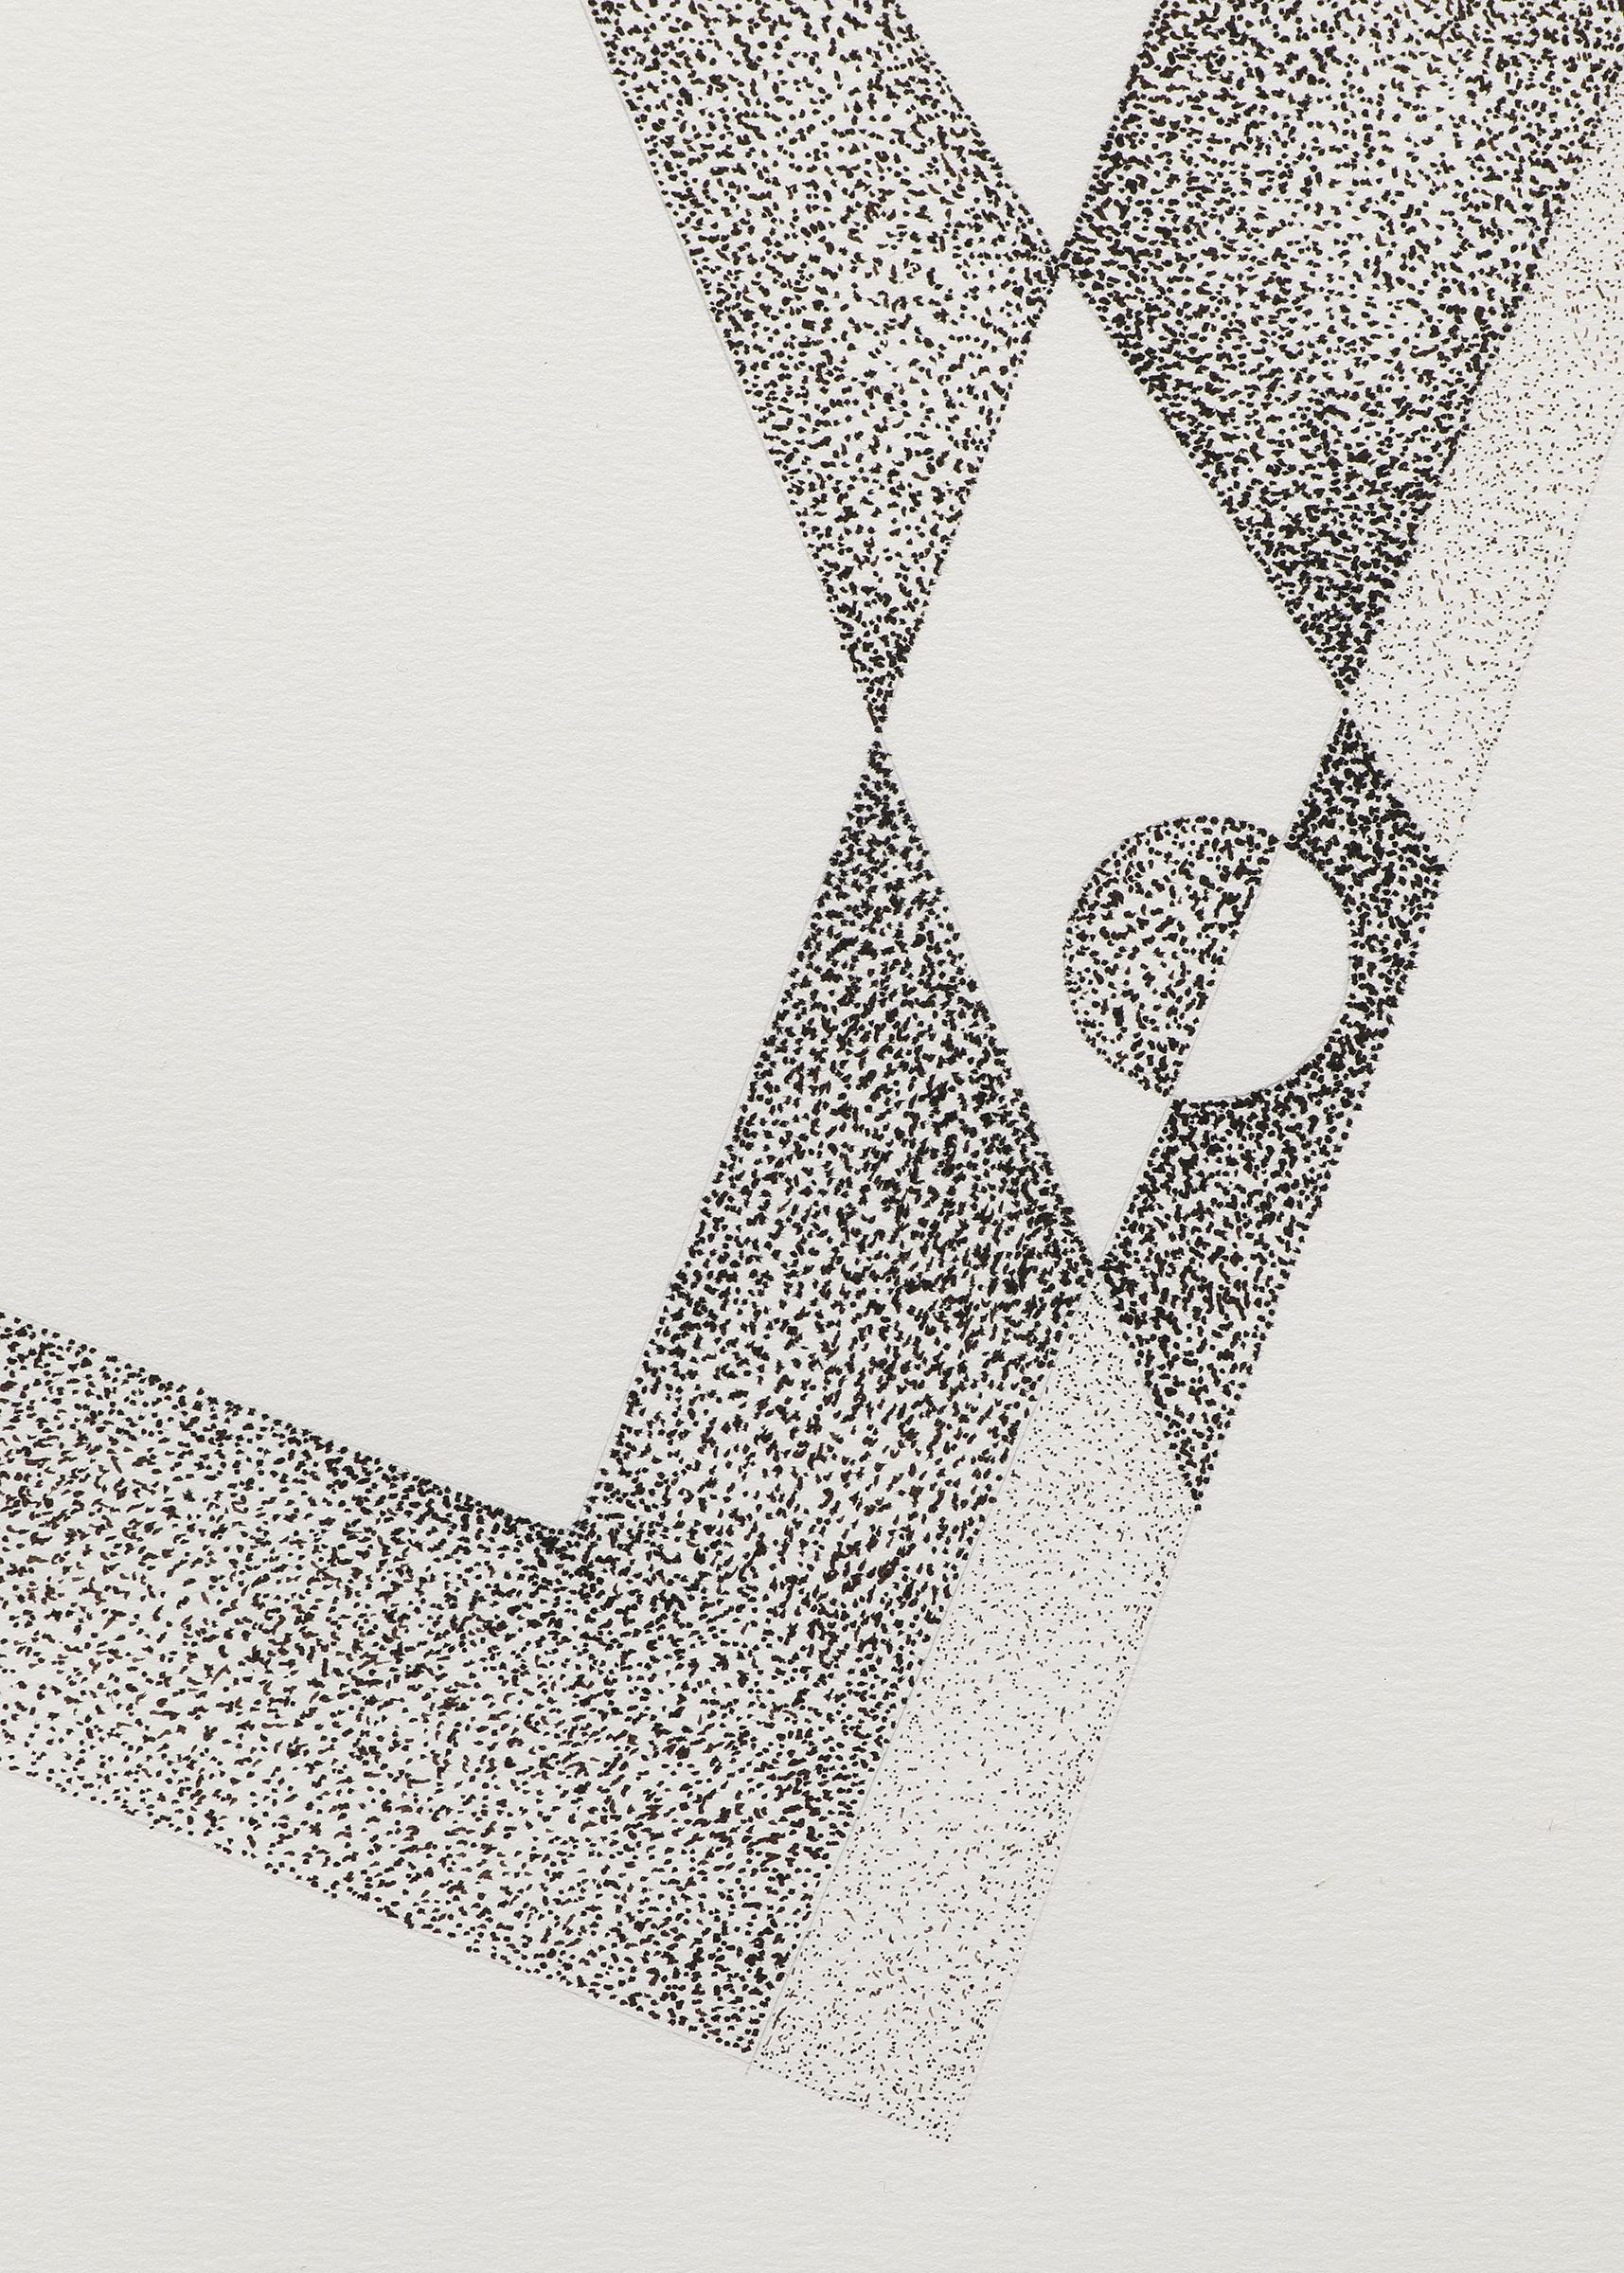 Abstract Pen and Pencil Drawing, Pointillist Geometric Shapes, Taos Artist - Gray Figurative Art by James Meek